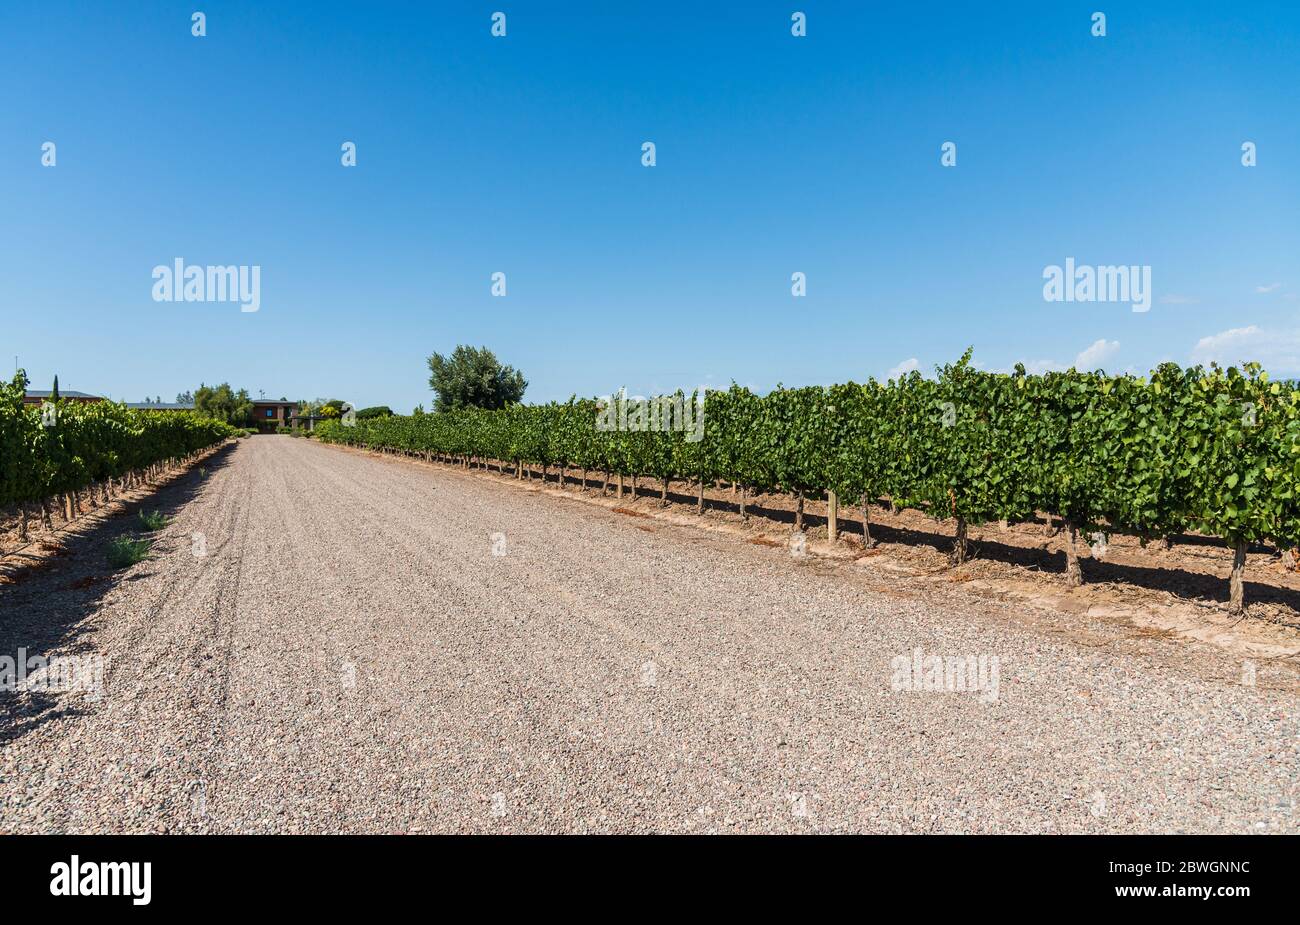 Vine plants in a vineyard in Mendoza on a sunny day with blue sky. Stock Photo